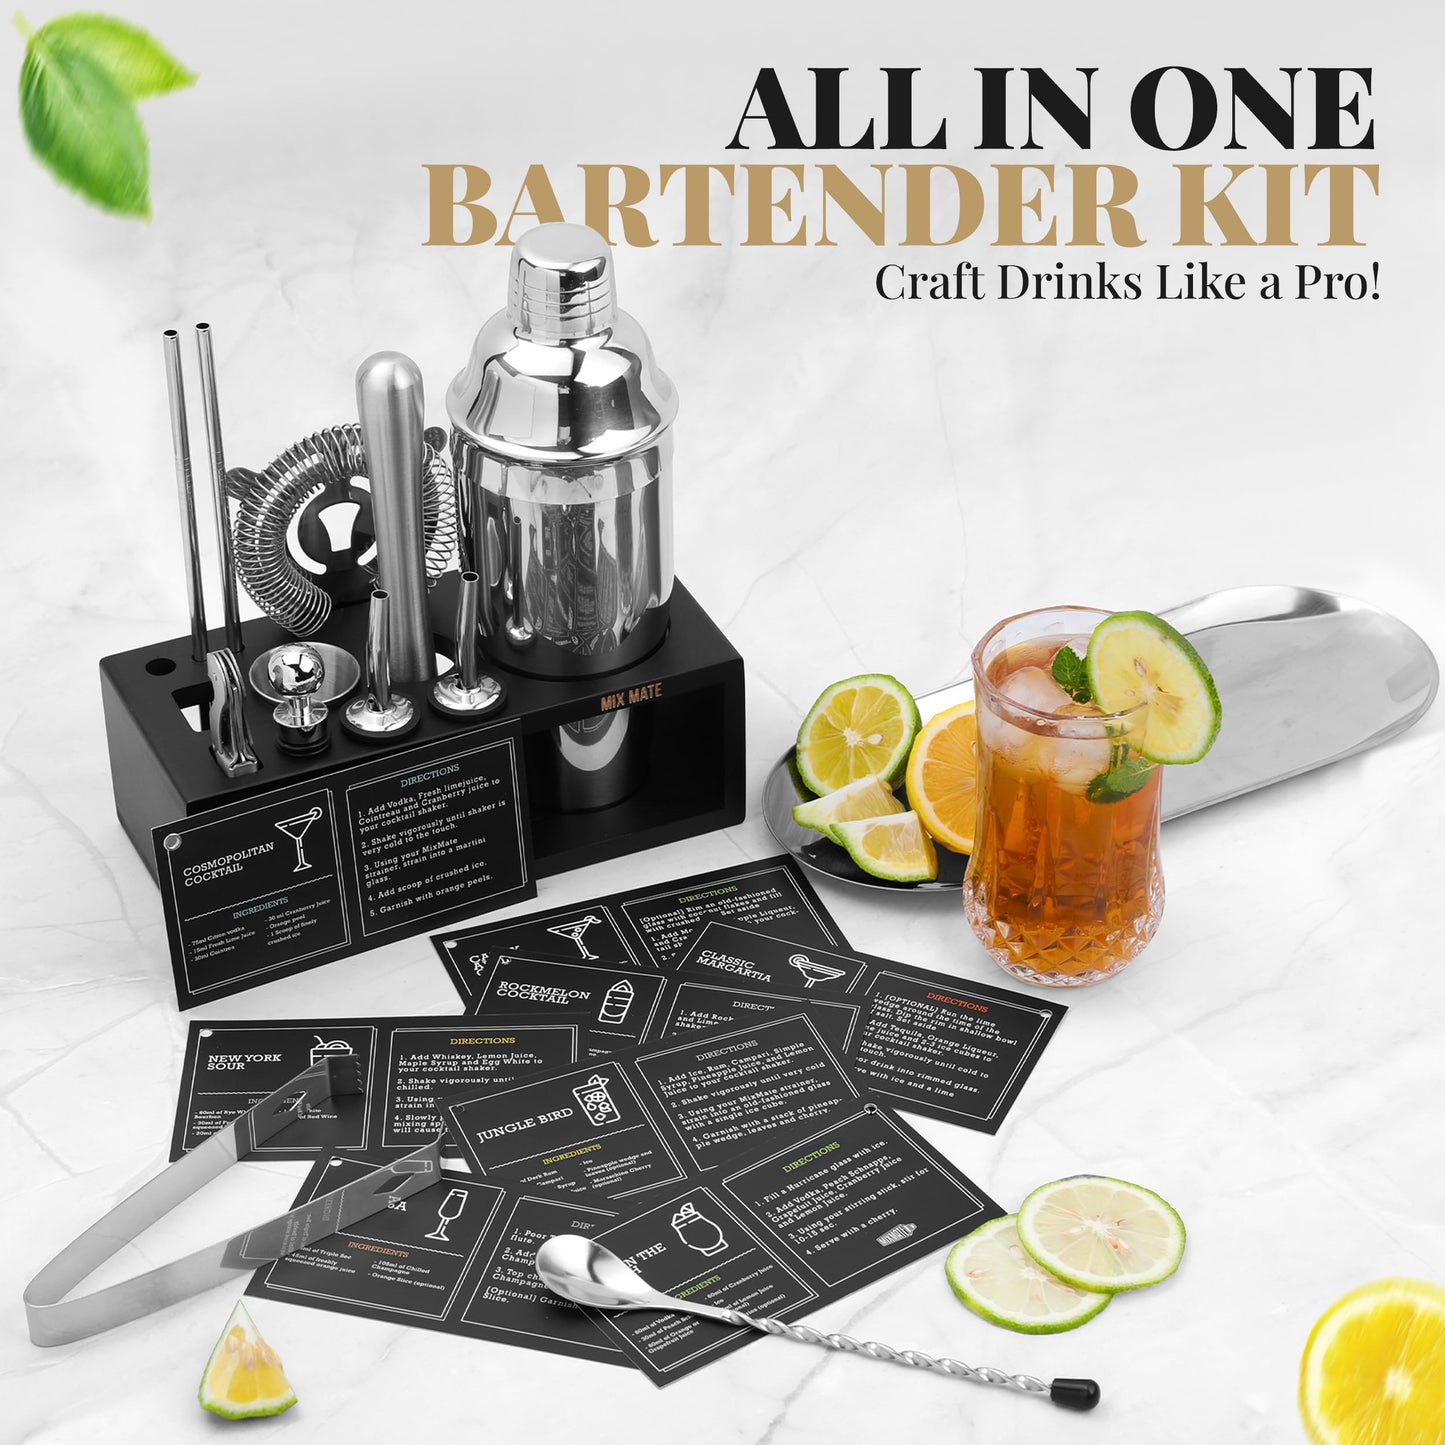 Mixology Bartender Kit with Stand - 15 Piece Bar Tool Set, Silver Bar Set Cocktail Shaker Set for Drink Mixing - Includes Martini Shaker, Jigger, Strainer, Bar Mixer Spoon, Tongs, Opener | Gift Idea